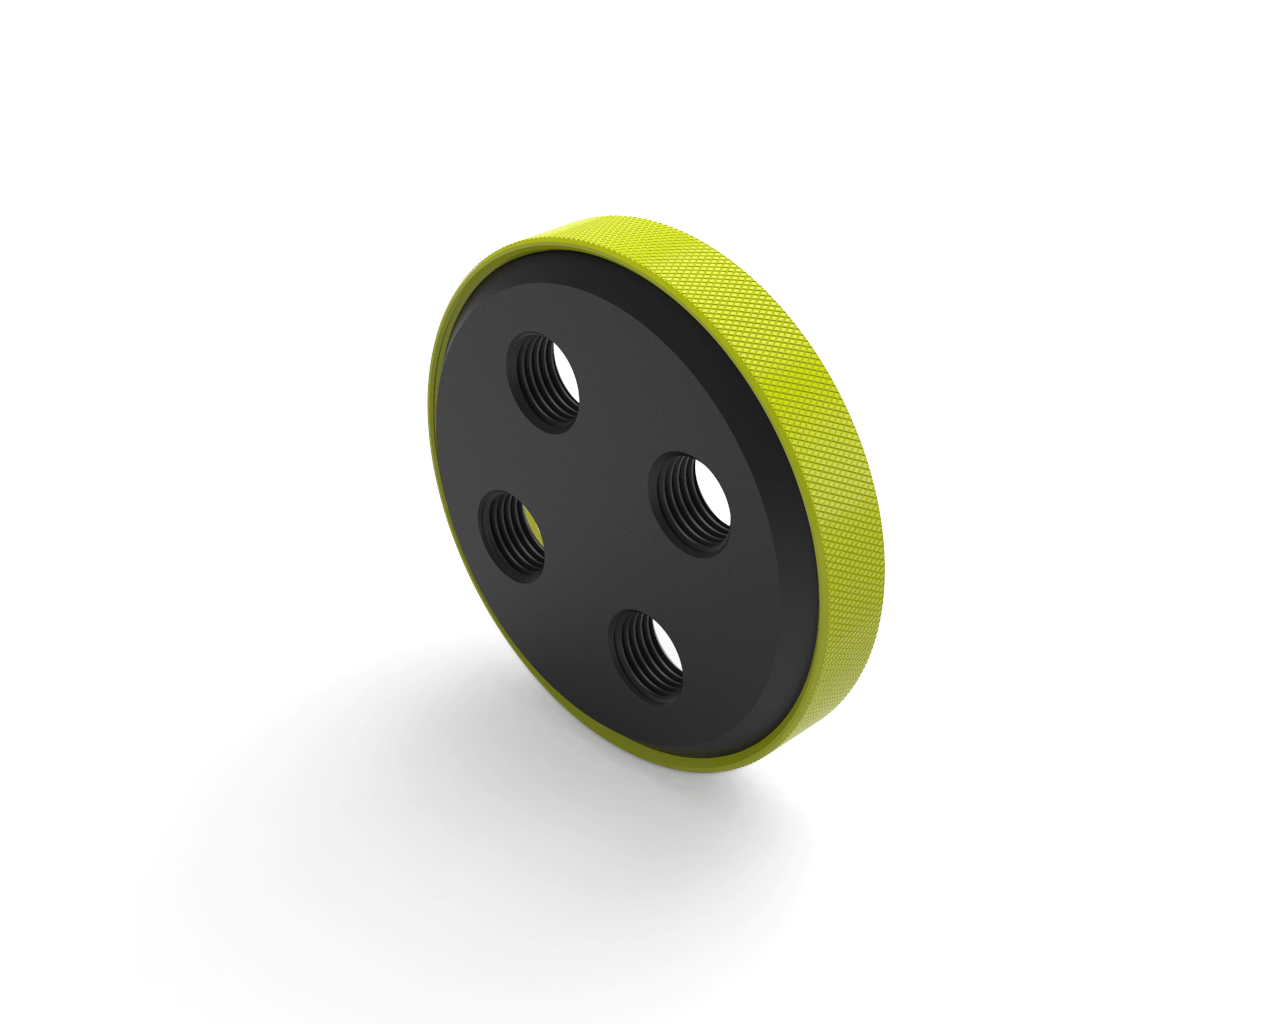 PrimoChill CTR Replacement SX Compression Ring - PrimoChill - KEEPING IT COOL Lime Yellow